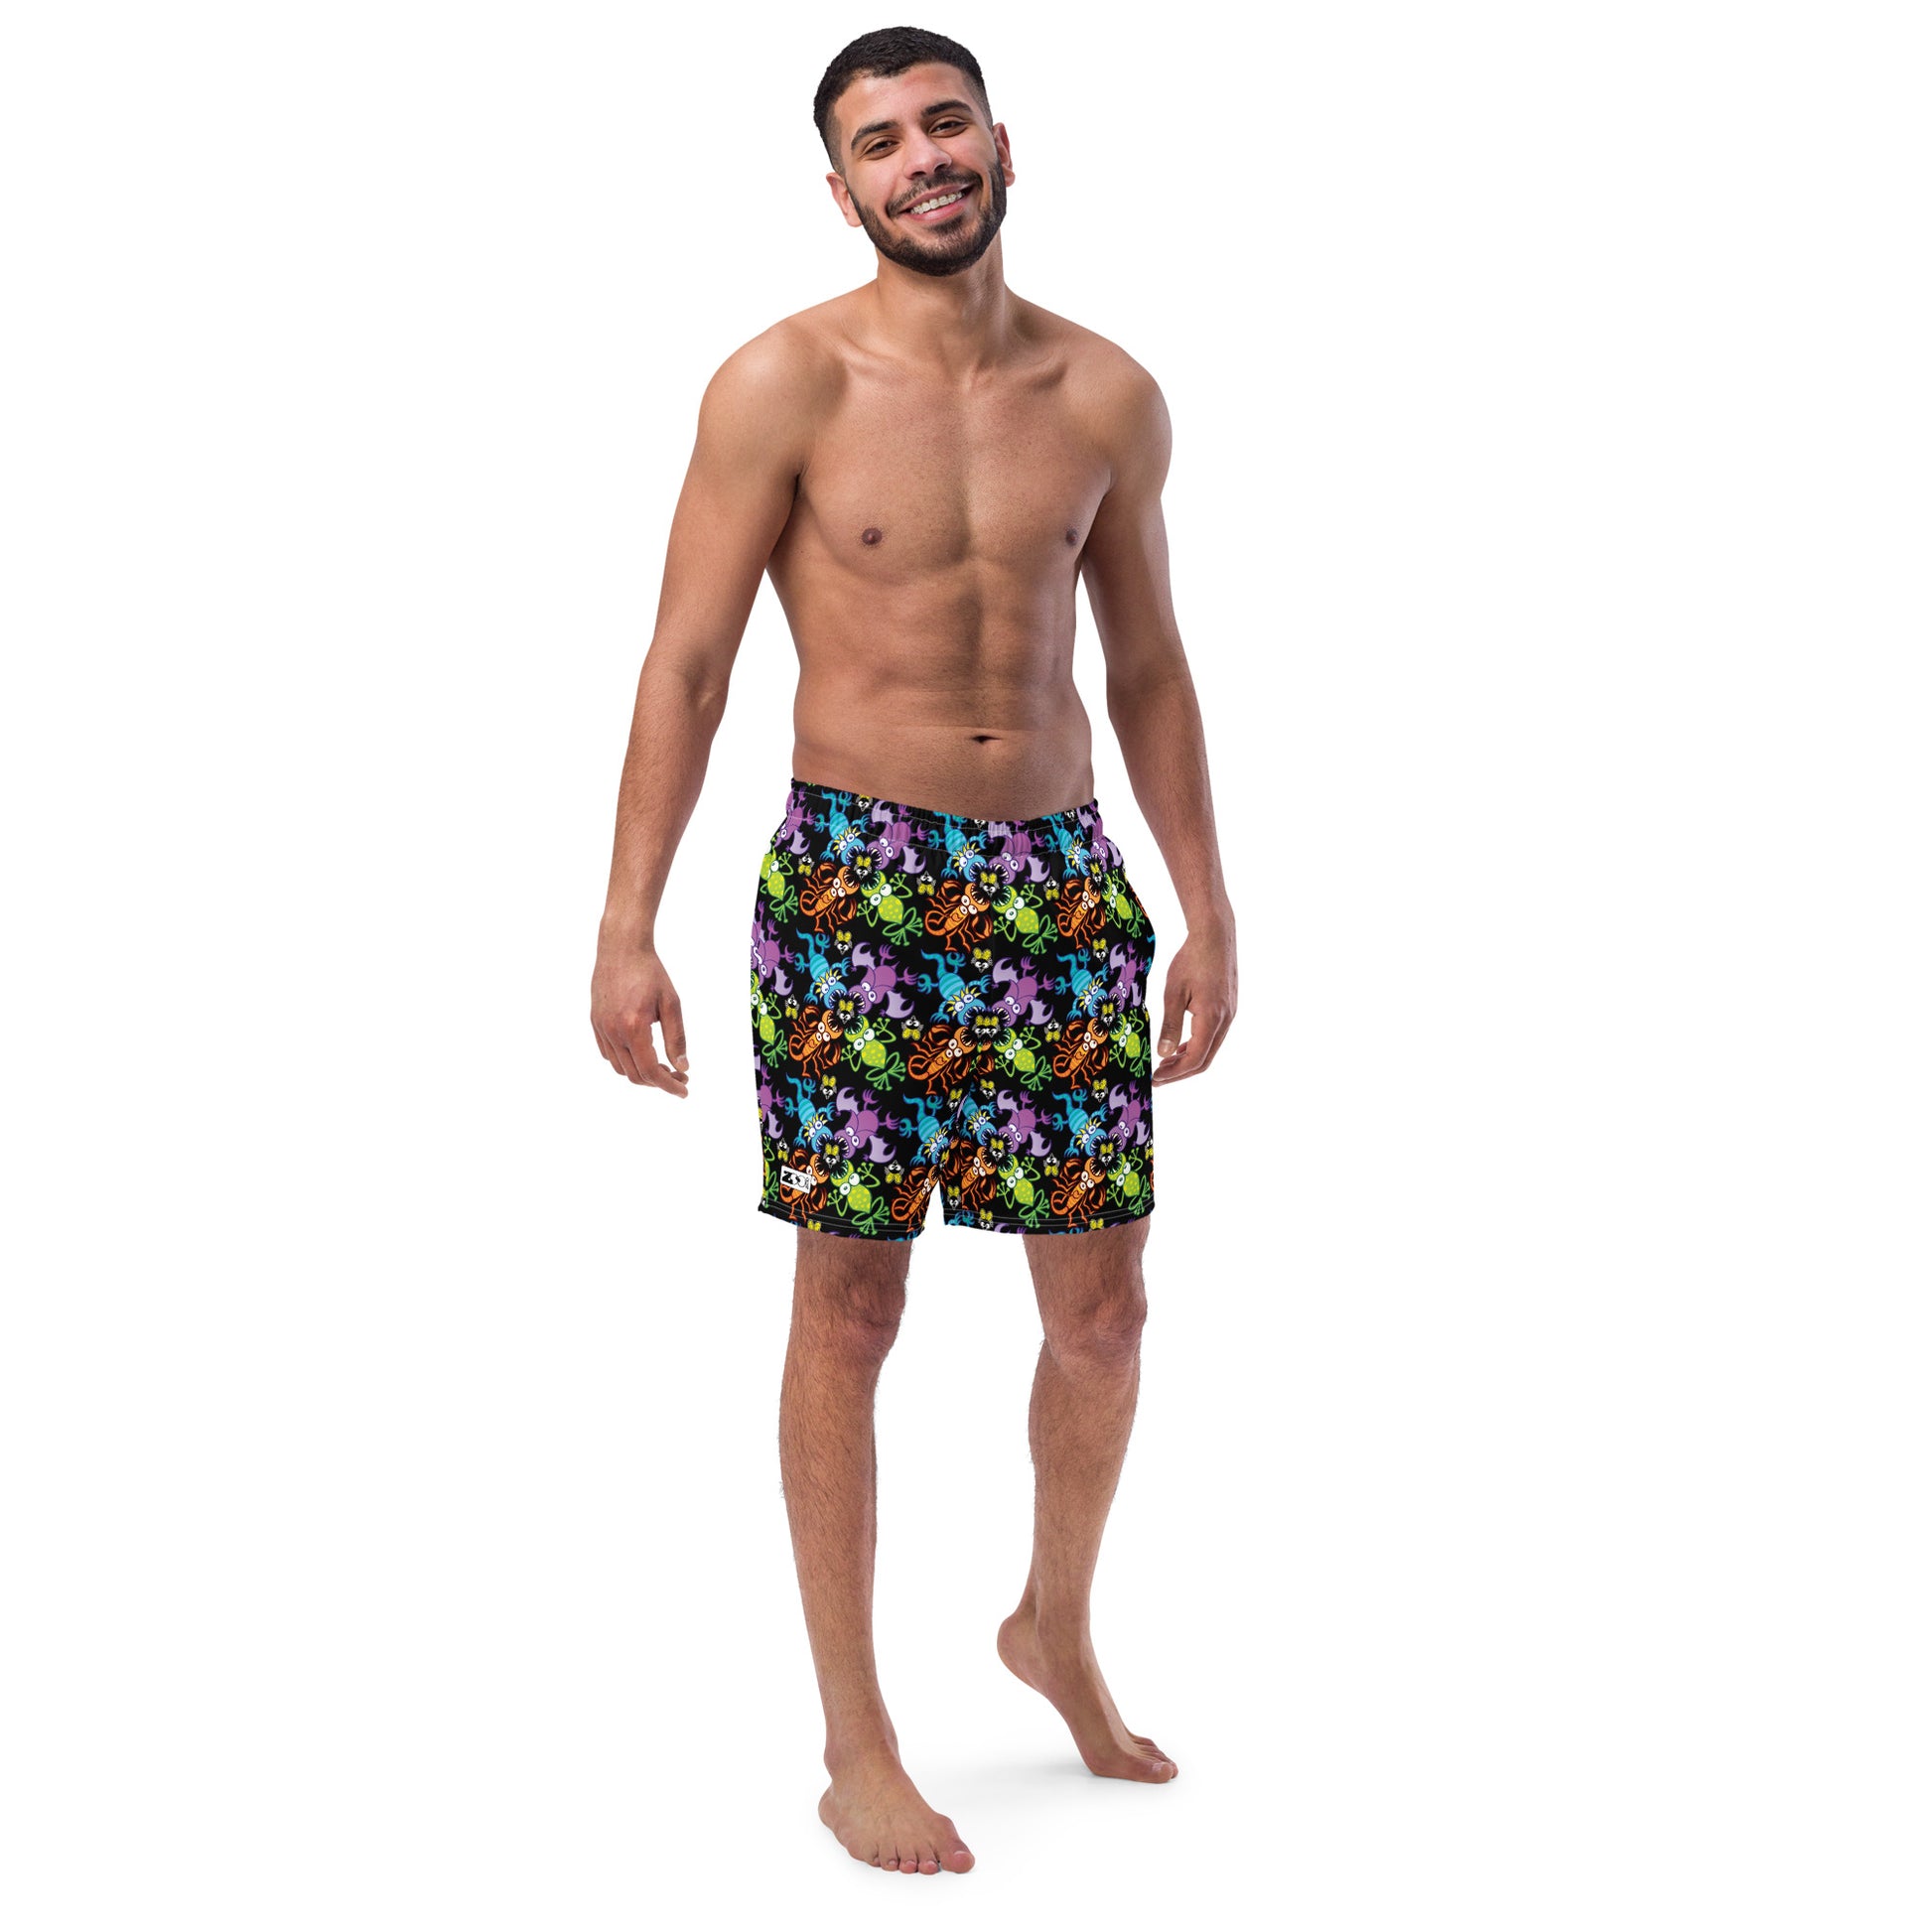 Smiling man wearing Swim Trunks All-over printed with Bat, scorpion, lizard and frog fighting over an unlucky fly